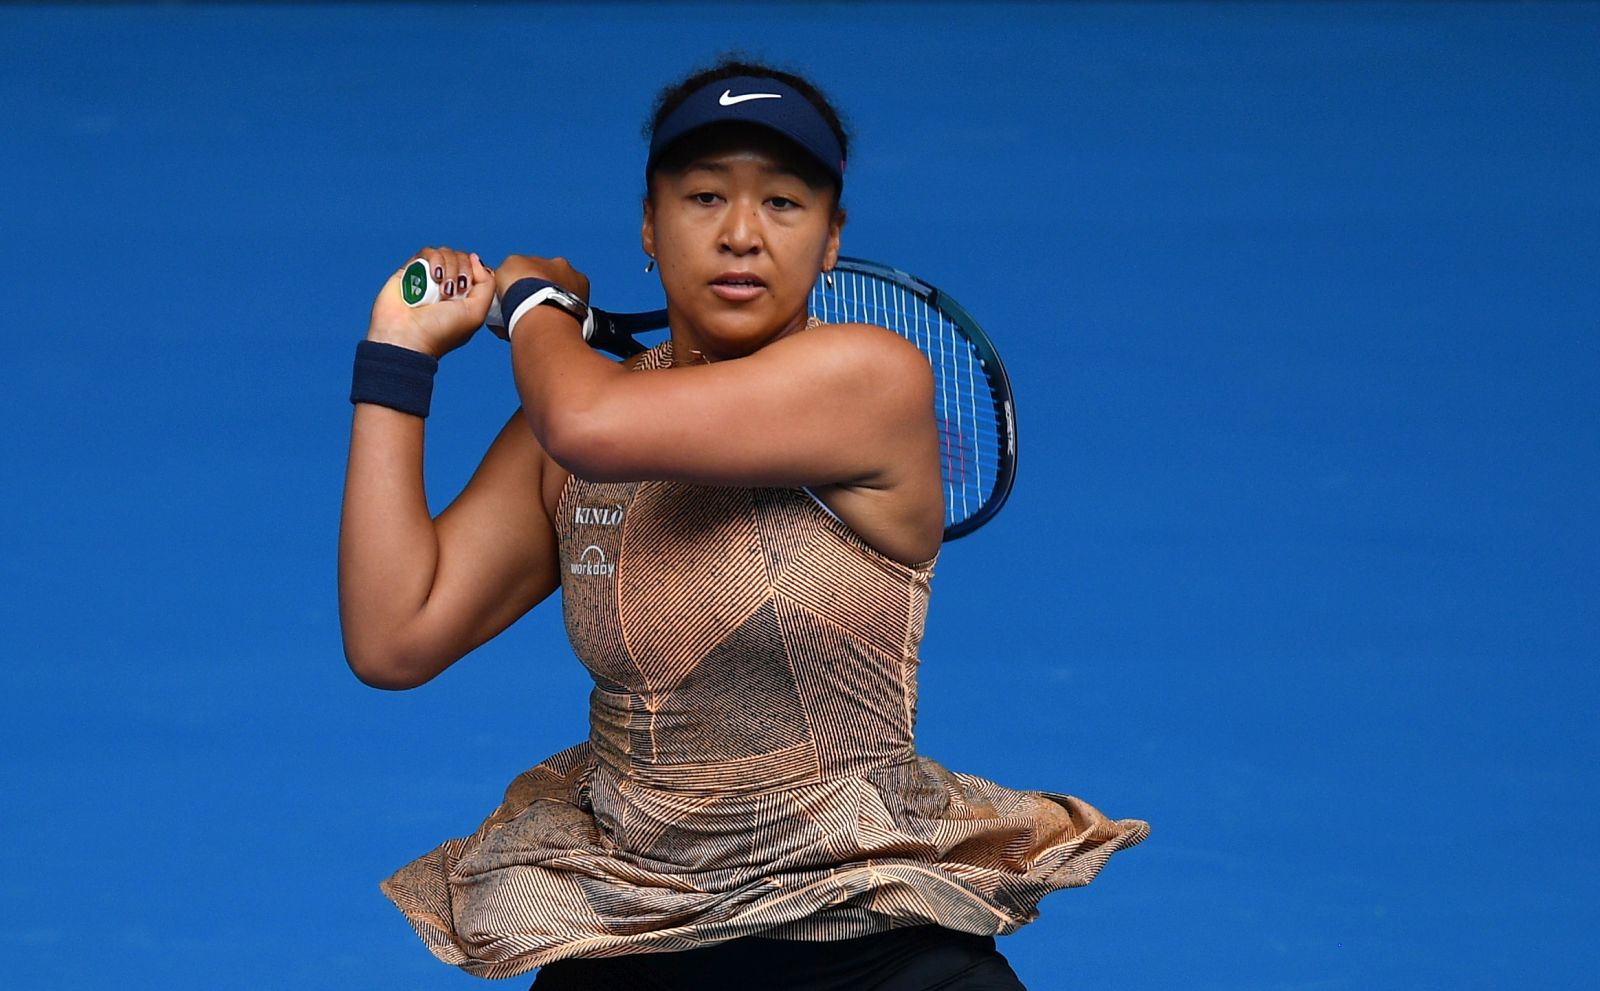 epa09665401 Naomi Osaka of Japan in action during her match against Alize Cornet of France on day two of the Melbourne Summer Set tennis tournament at Melbourne Park in Melbourne, Australia, 04 January 2022.  EPA/JAMES ROSS  AUSTRALIA AND NEW ZEALAND OUT